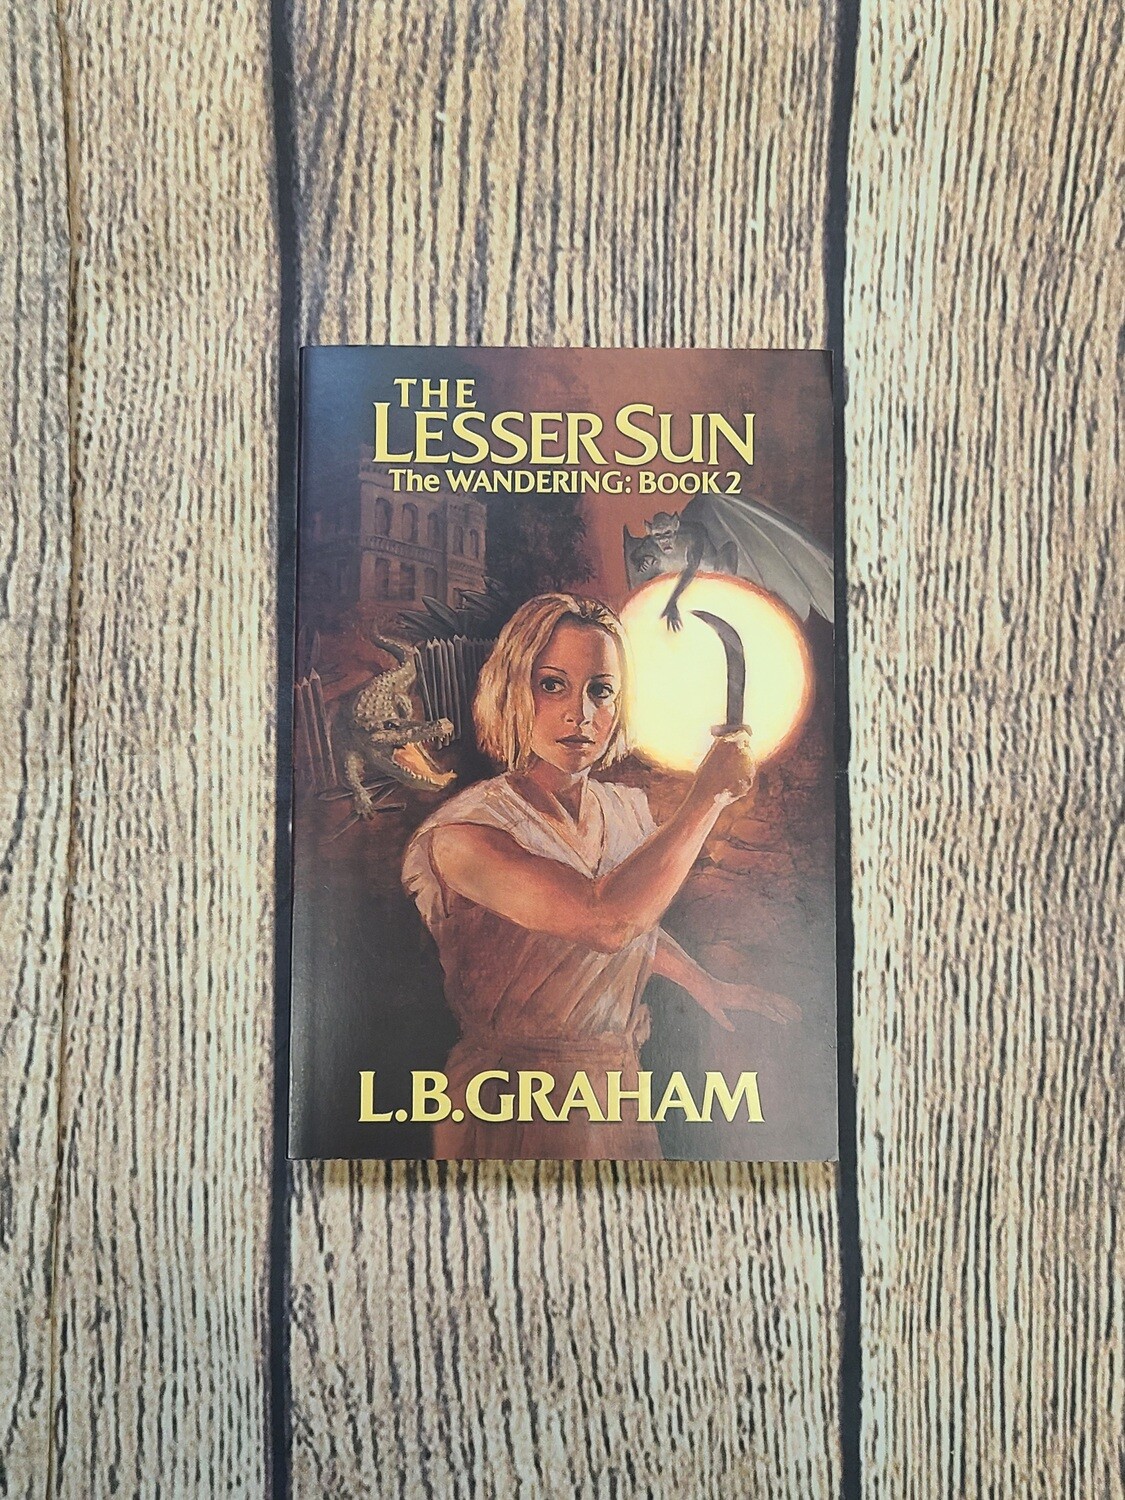 The Wandering: The Lesser Sun by L.B. Graham